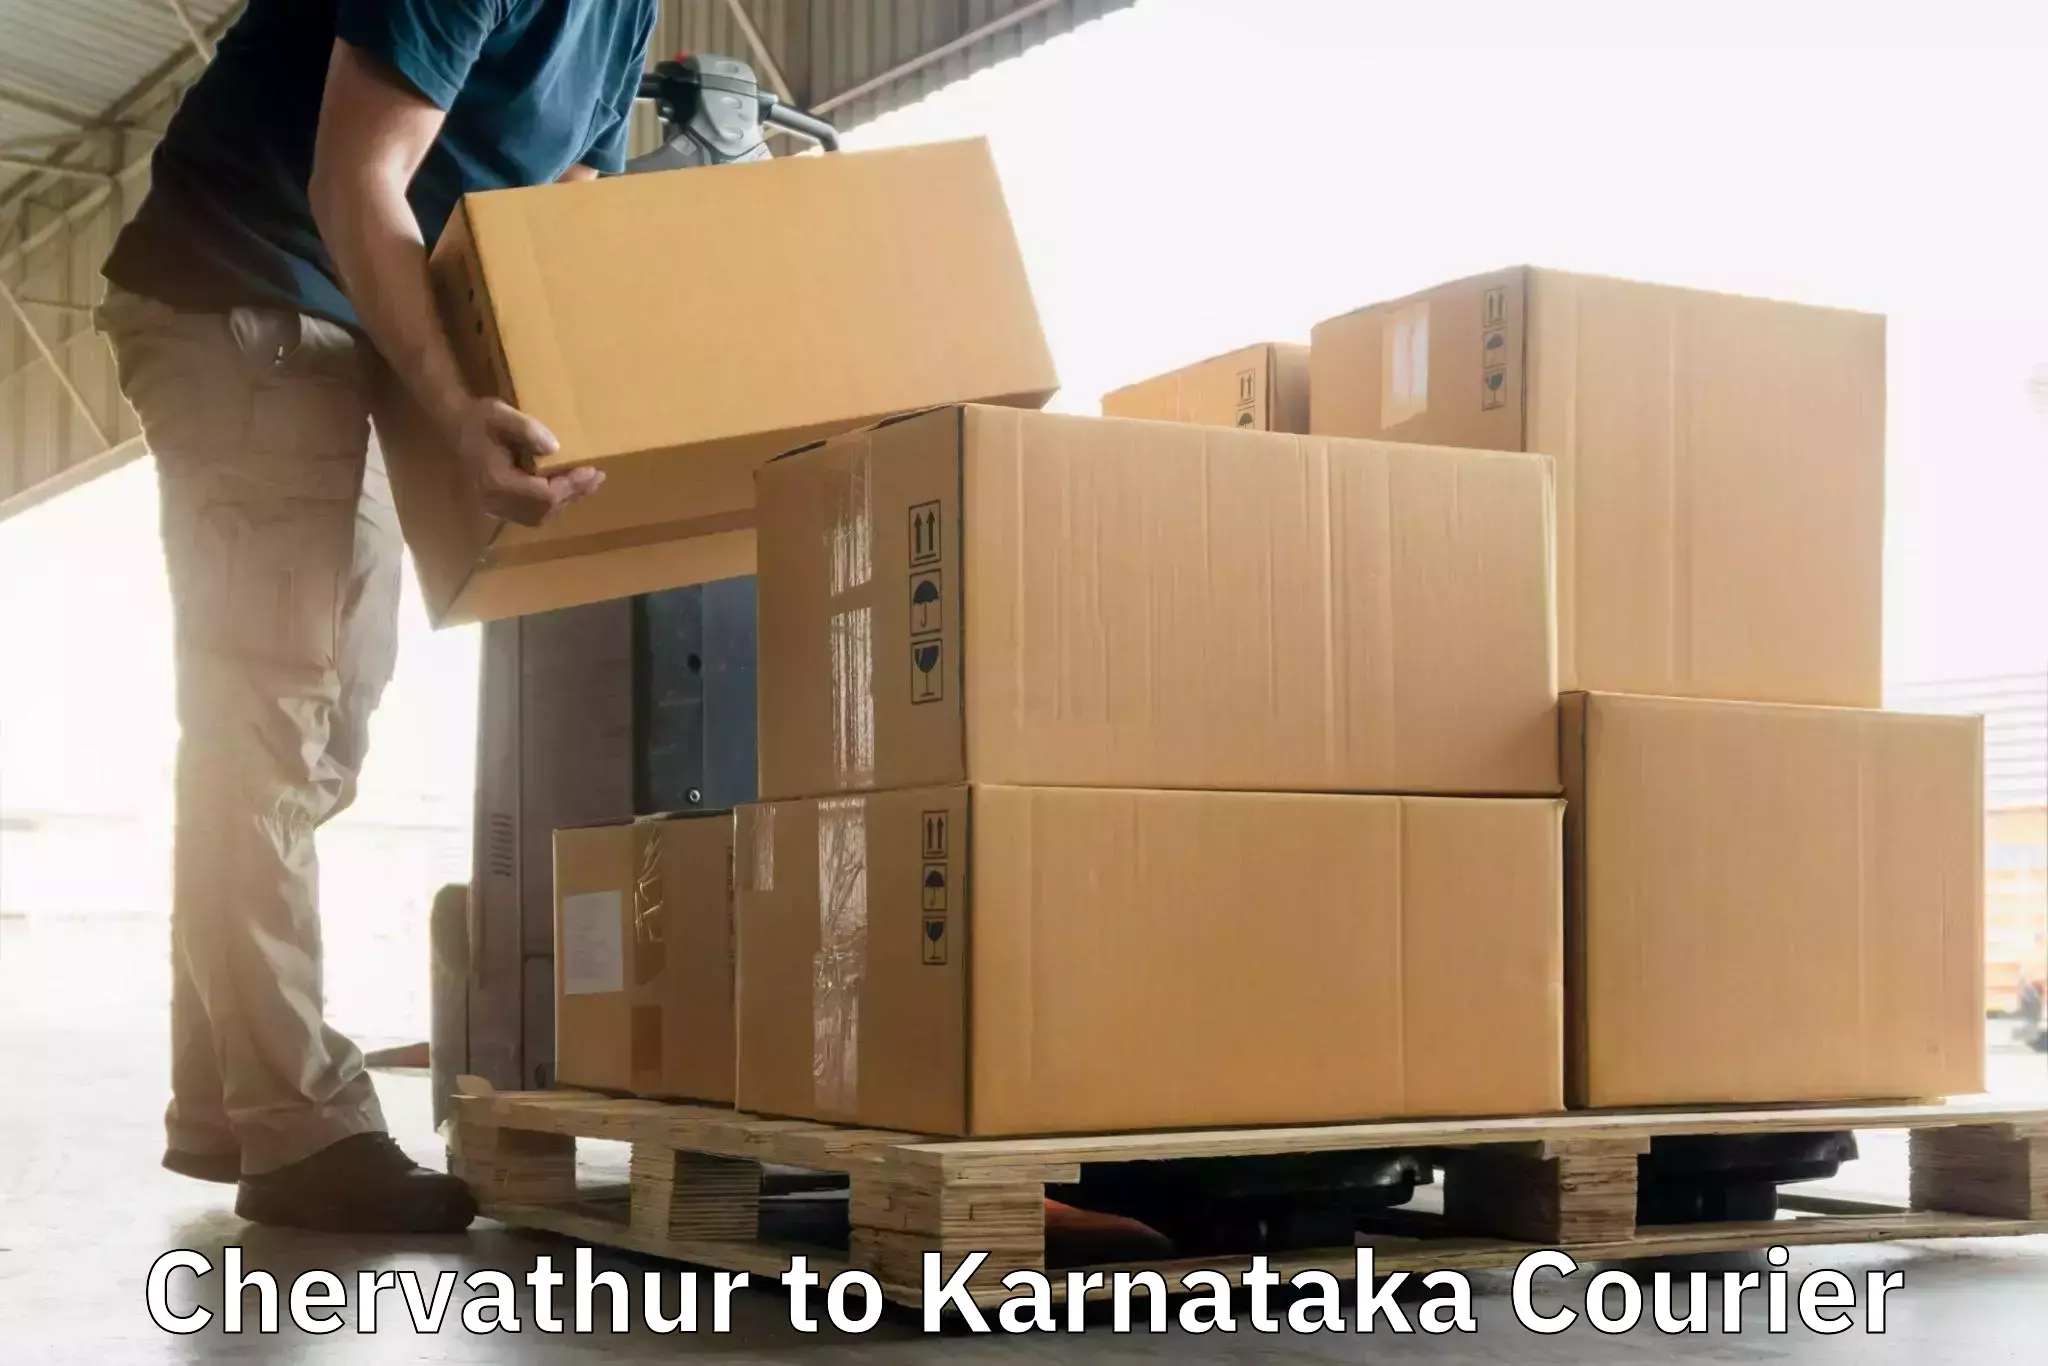 Package delivery network Chervathur to IIIT Dharward